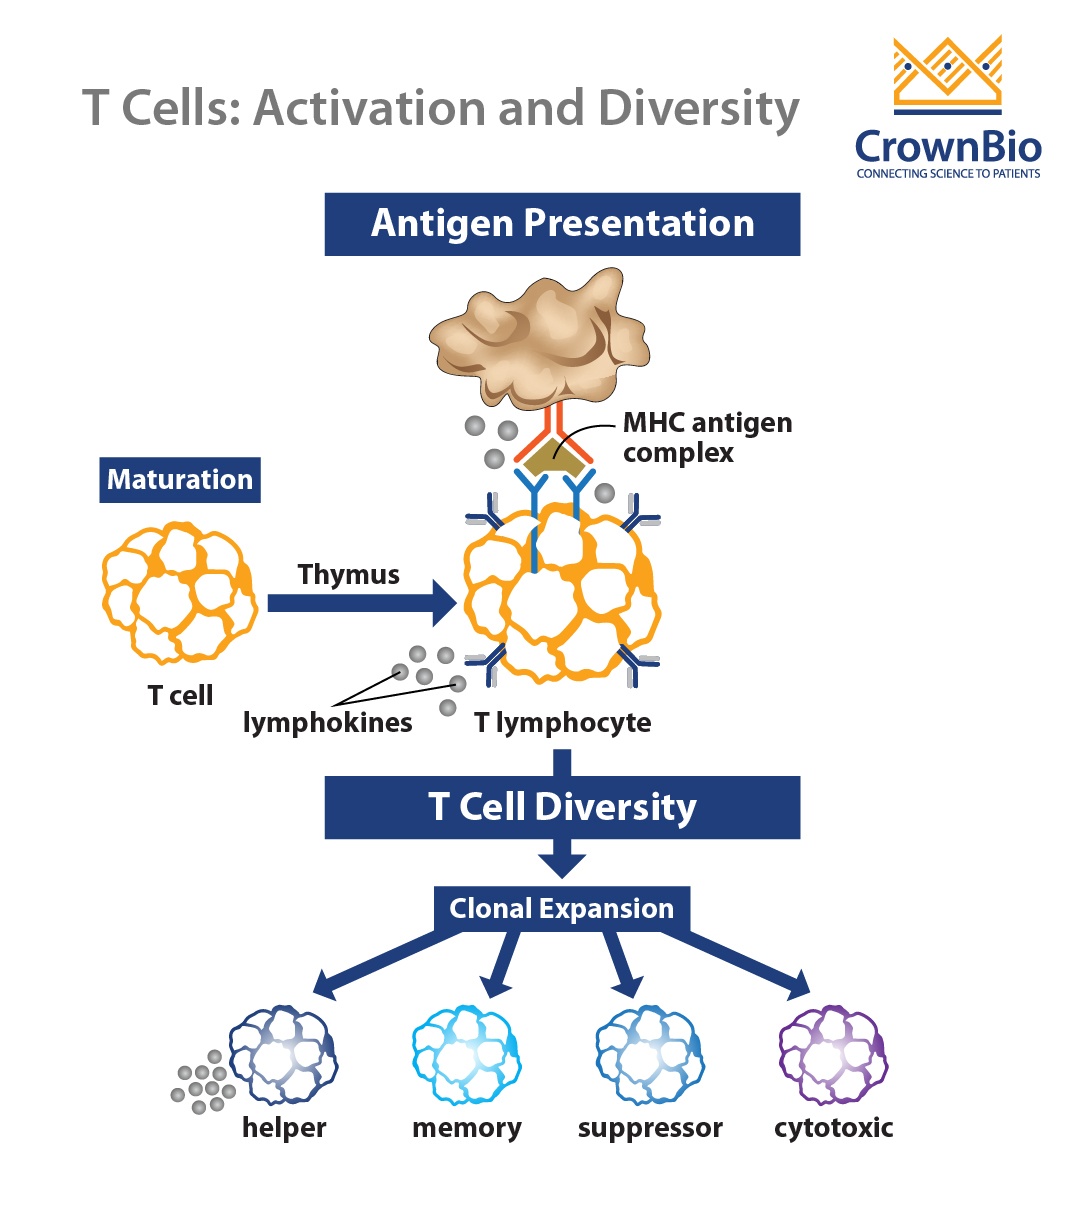 Using T Cells in Immuno-Oncology